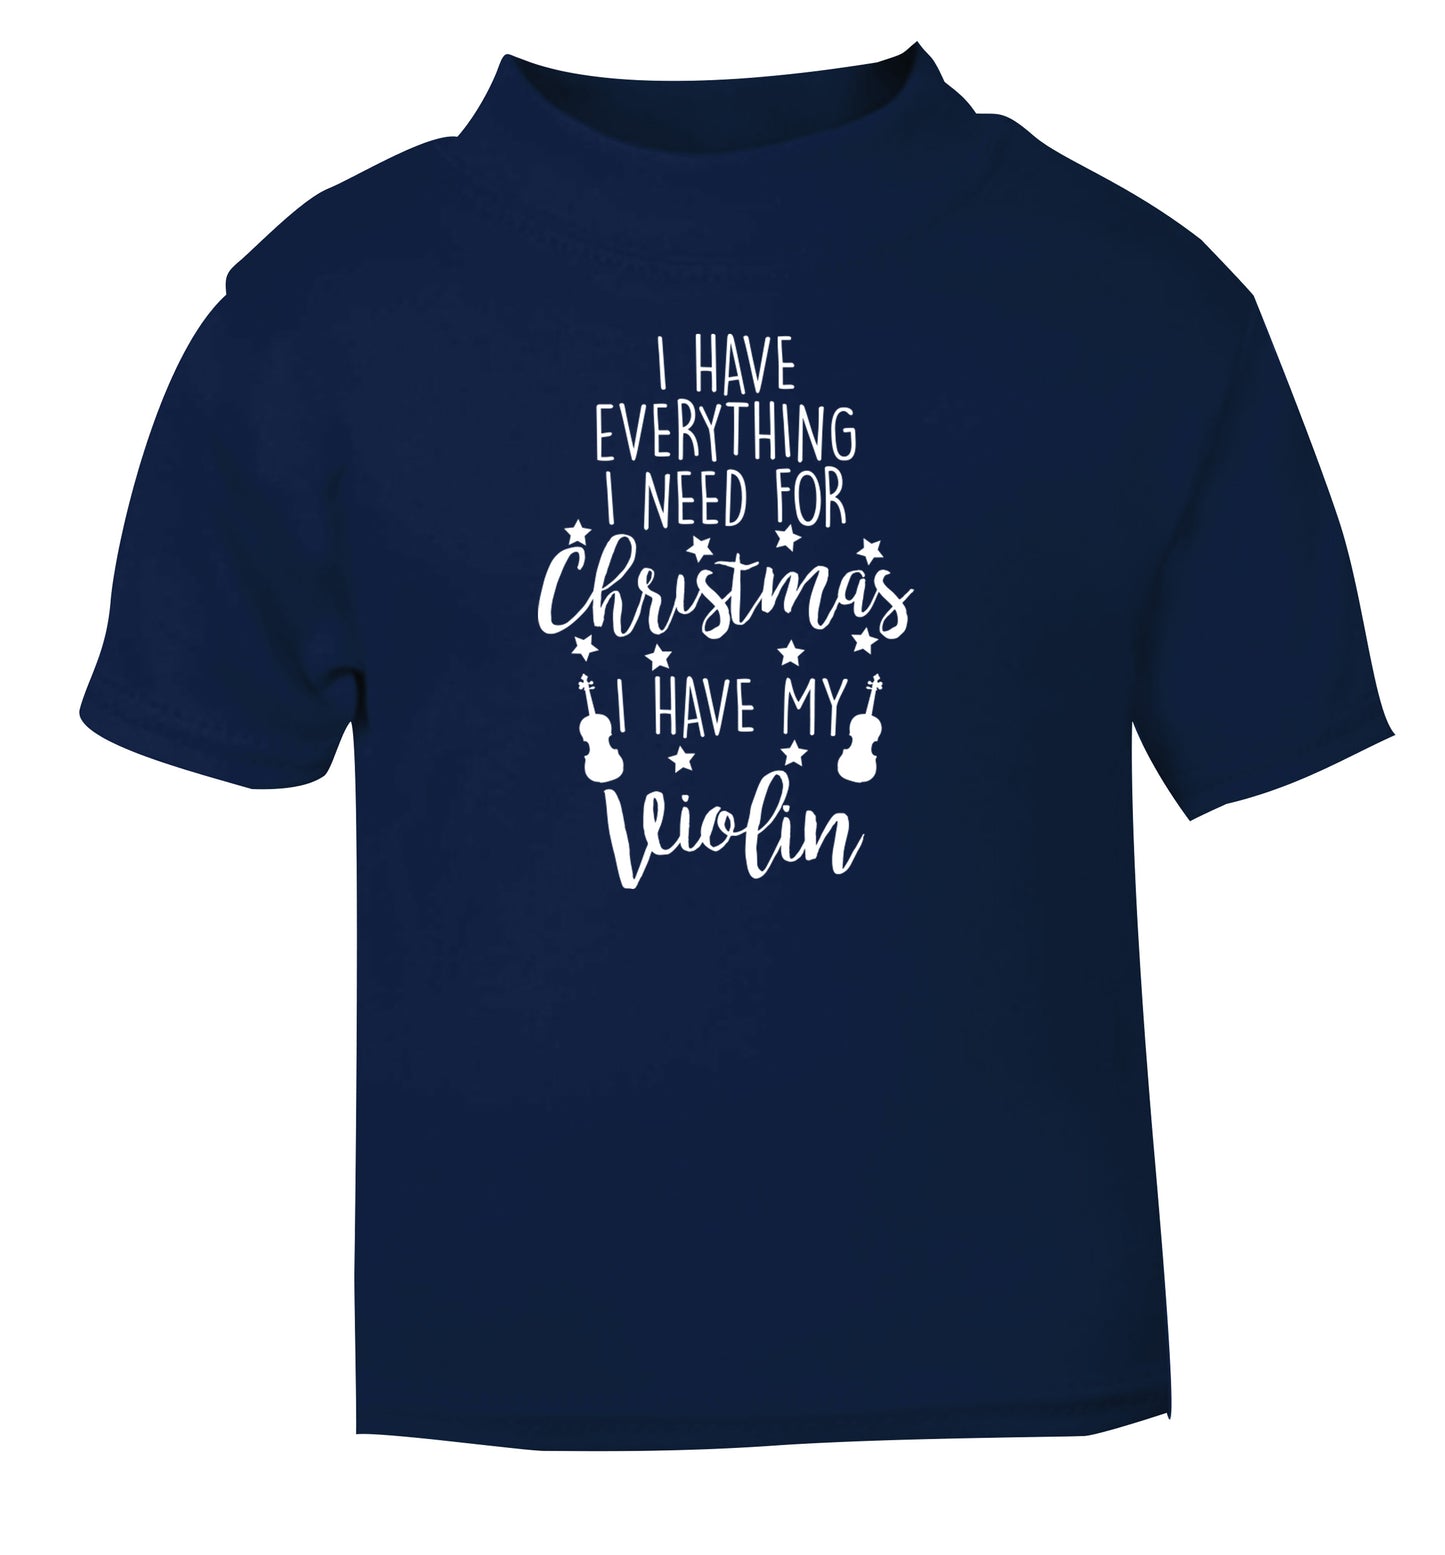 I have everything I need for Christmas I have my violin navy Baby Toddler Tshirt 2 Years